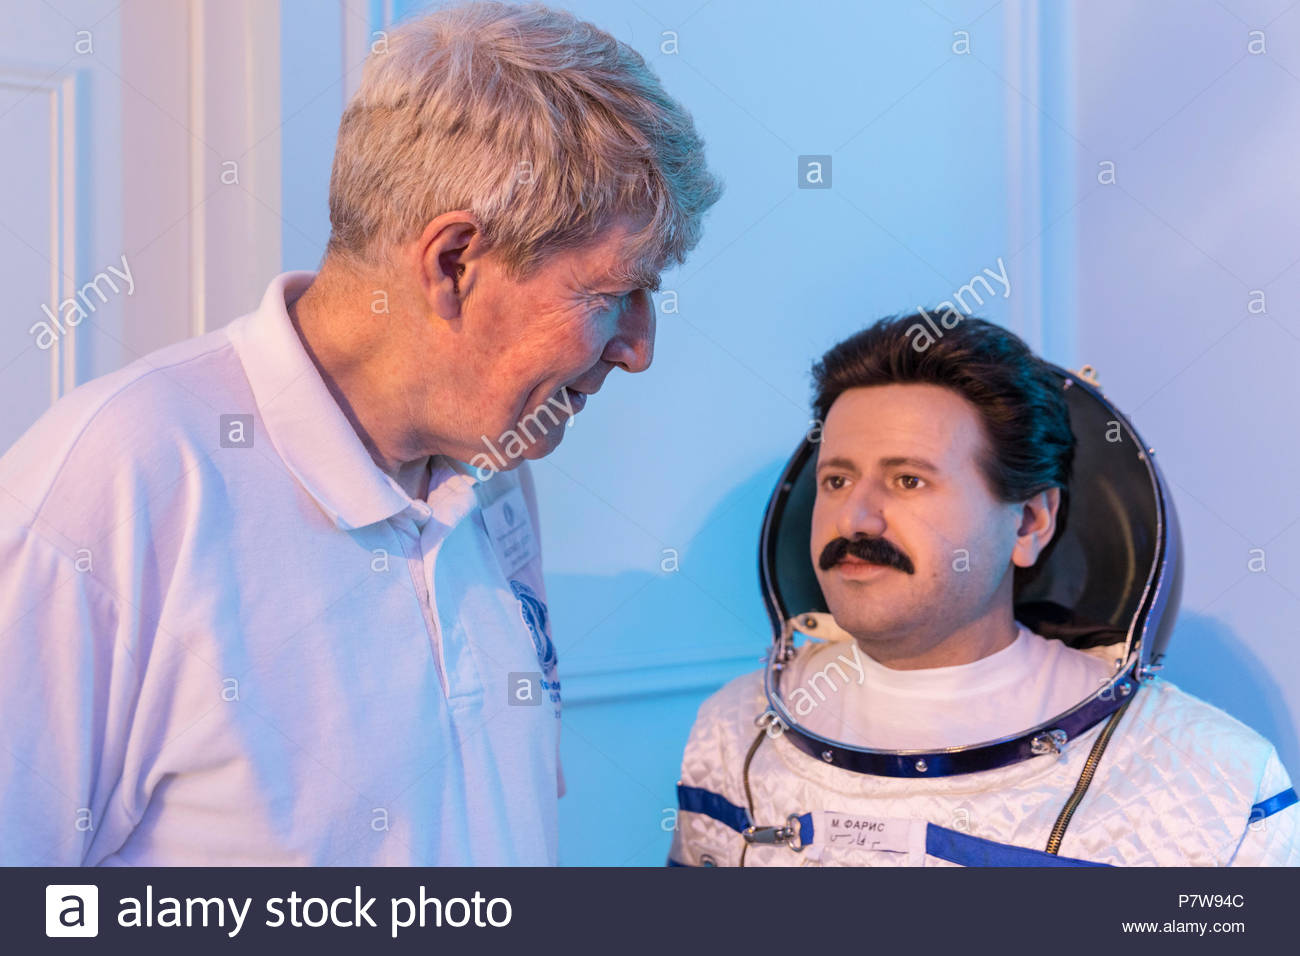 london-8th-july-2018the-british-interplanetary-societys-alistair-scott-looks-at-the-syrian-cosmonaut-in-the-installation-space-refugee-about-first-syrian-cosmonaut-muhammed-faris-art-night-2018-features-12-special-projects-curated-by-hayward-gallery-and-over-50-presented-in-art-night-open-curated-by-cultural-organisations-and-creatives-throughout-south-bank-vauxhall-and-nine-elms-on-saturday-7th-and-sunday-8th-july-credit-imageplotter-news-and-sportsalamy-live-news-P7W94C.jpg